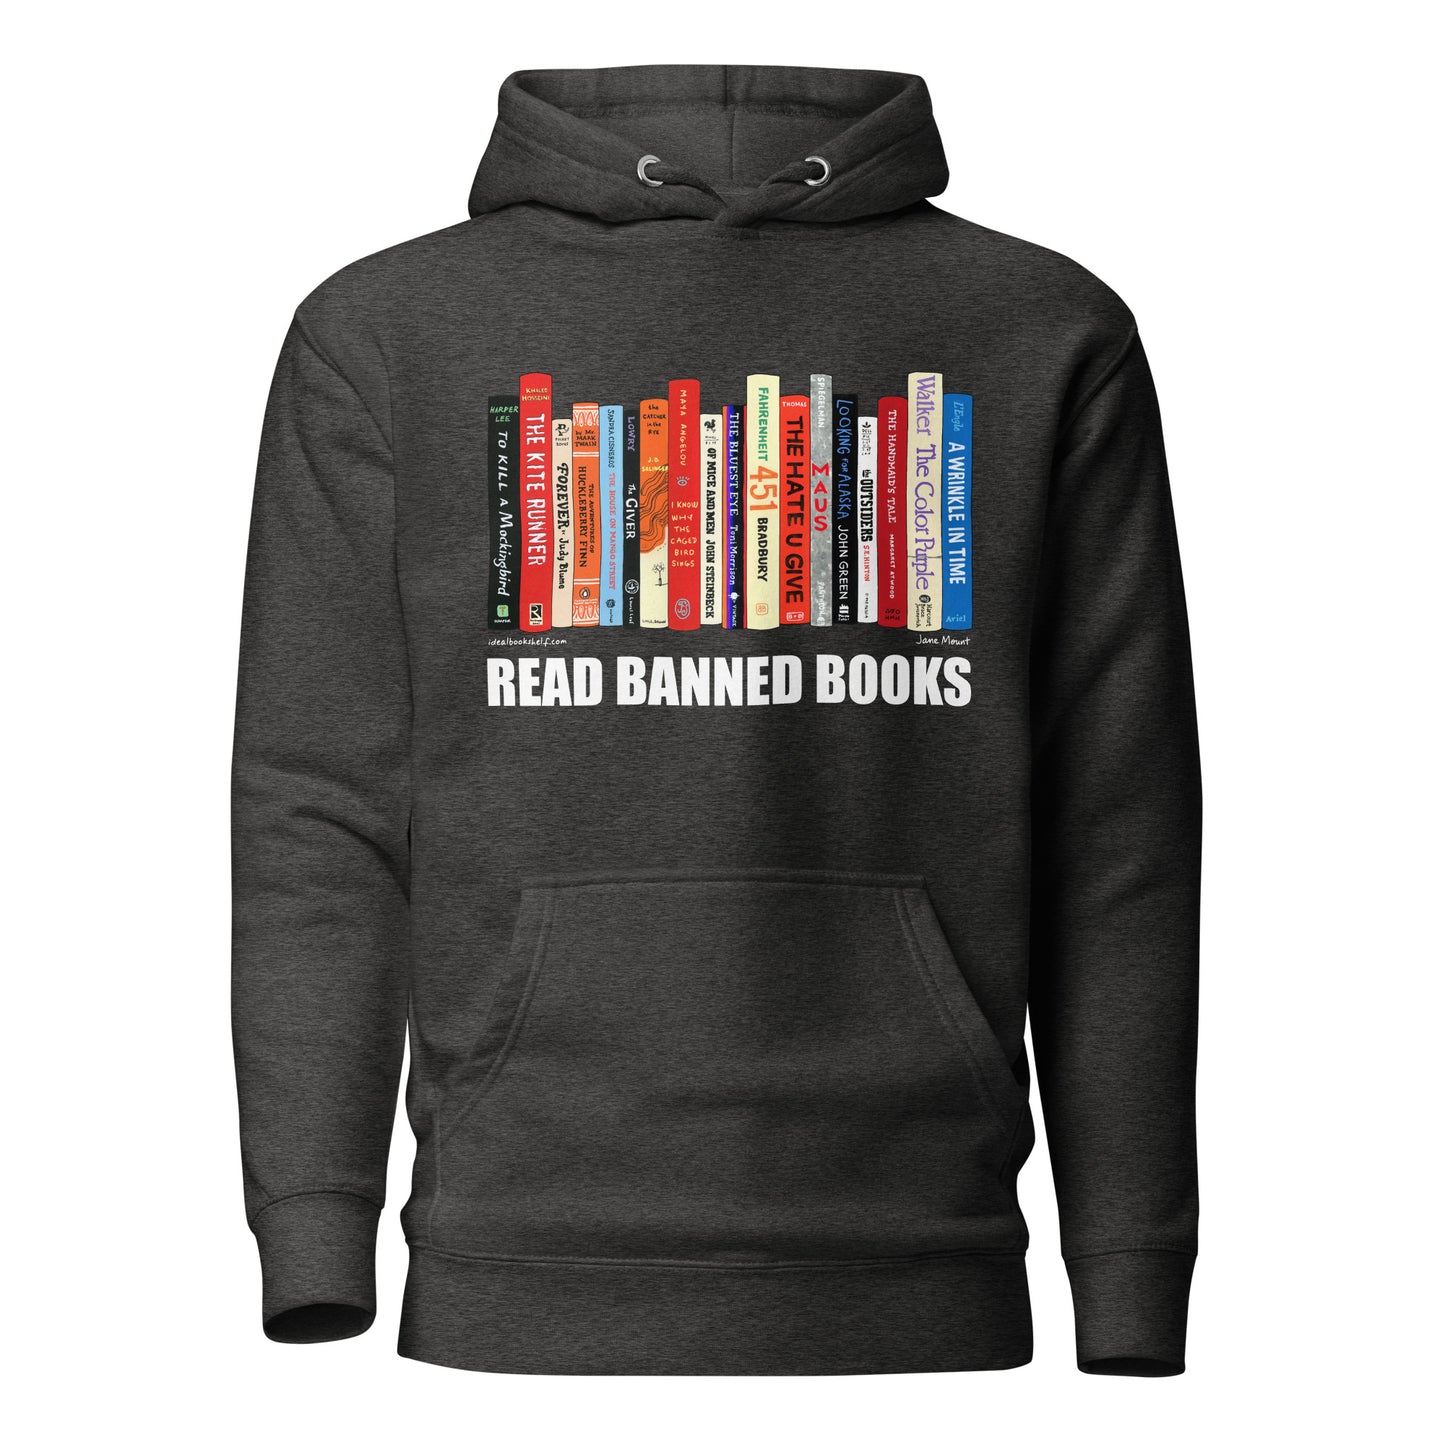 READ BANNED BOOKS Unisex Hoodie